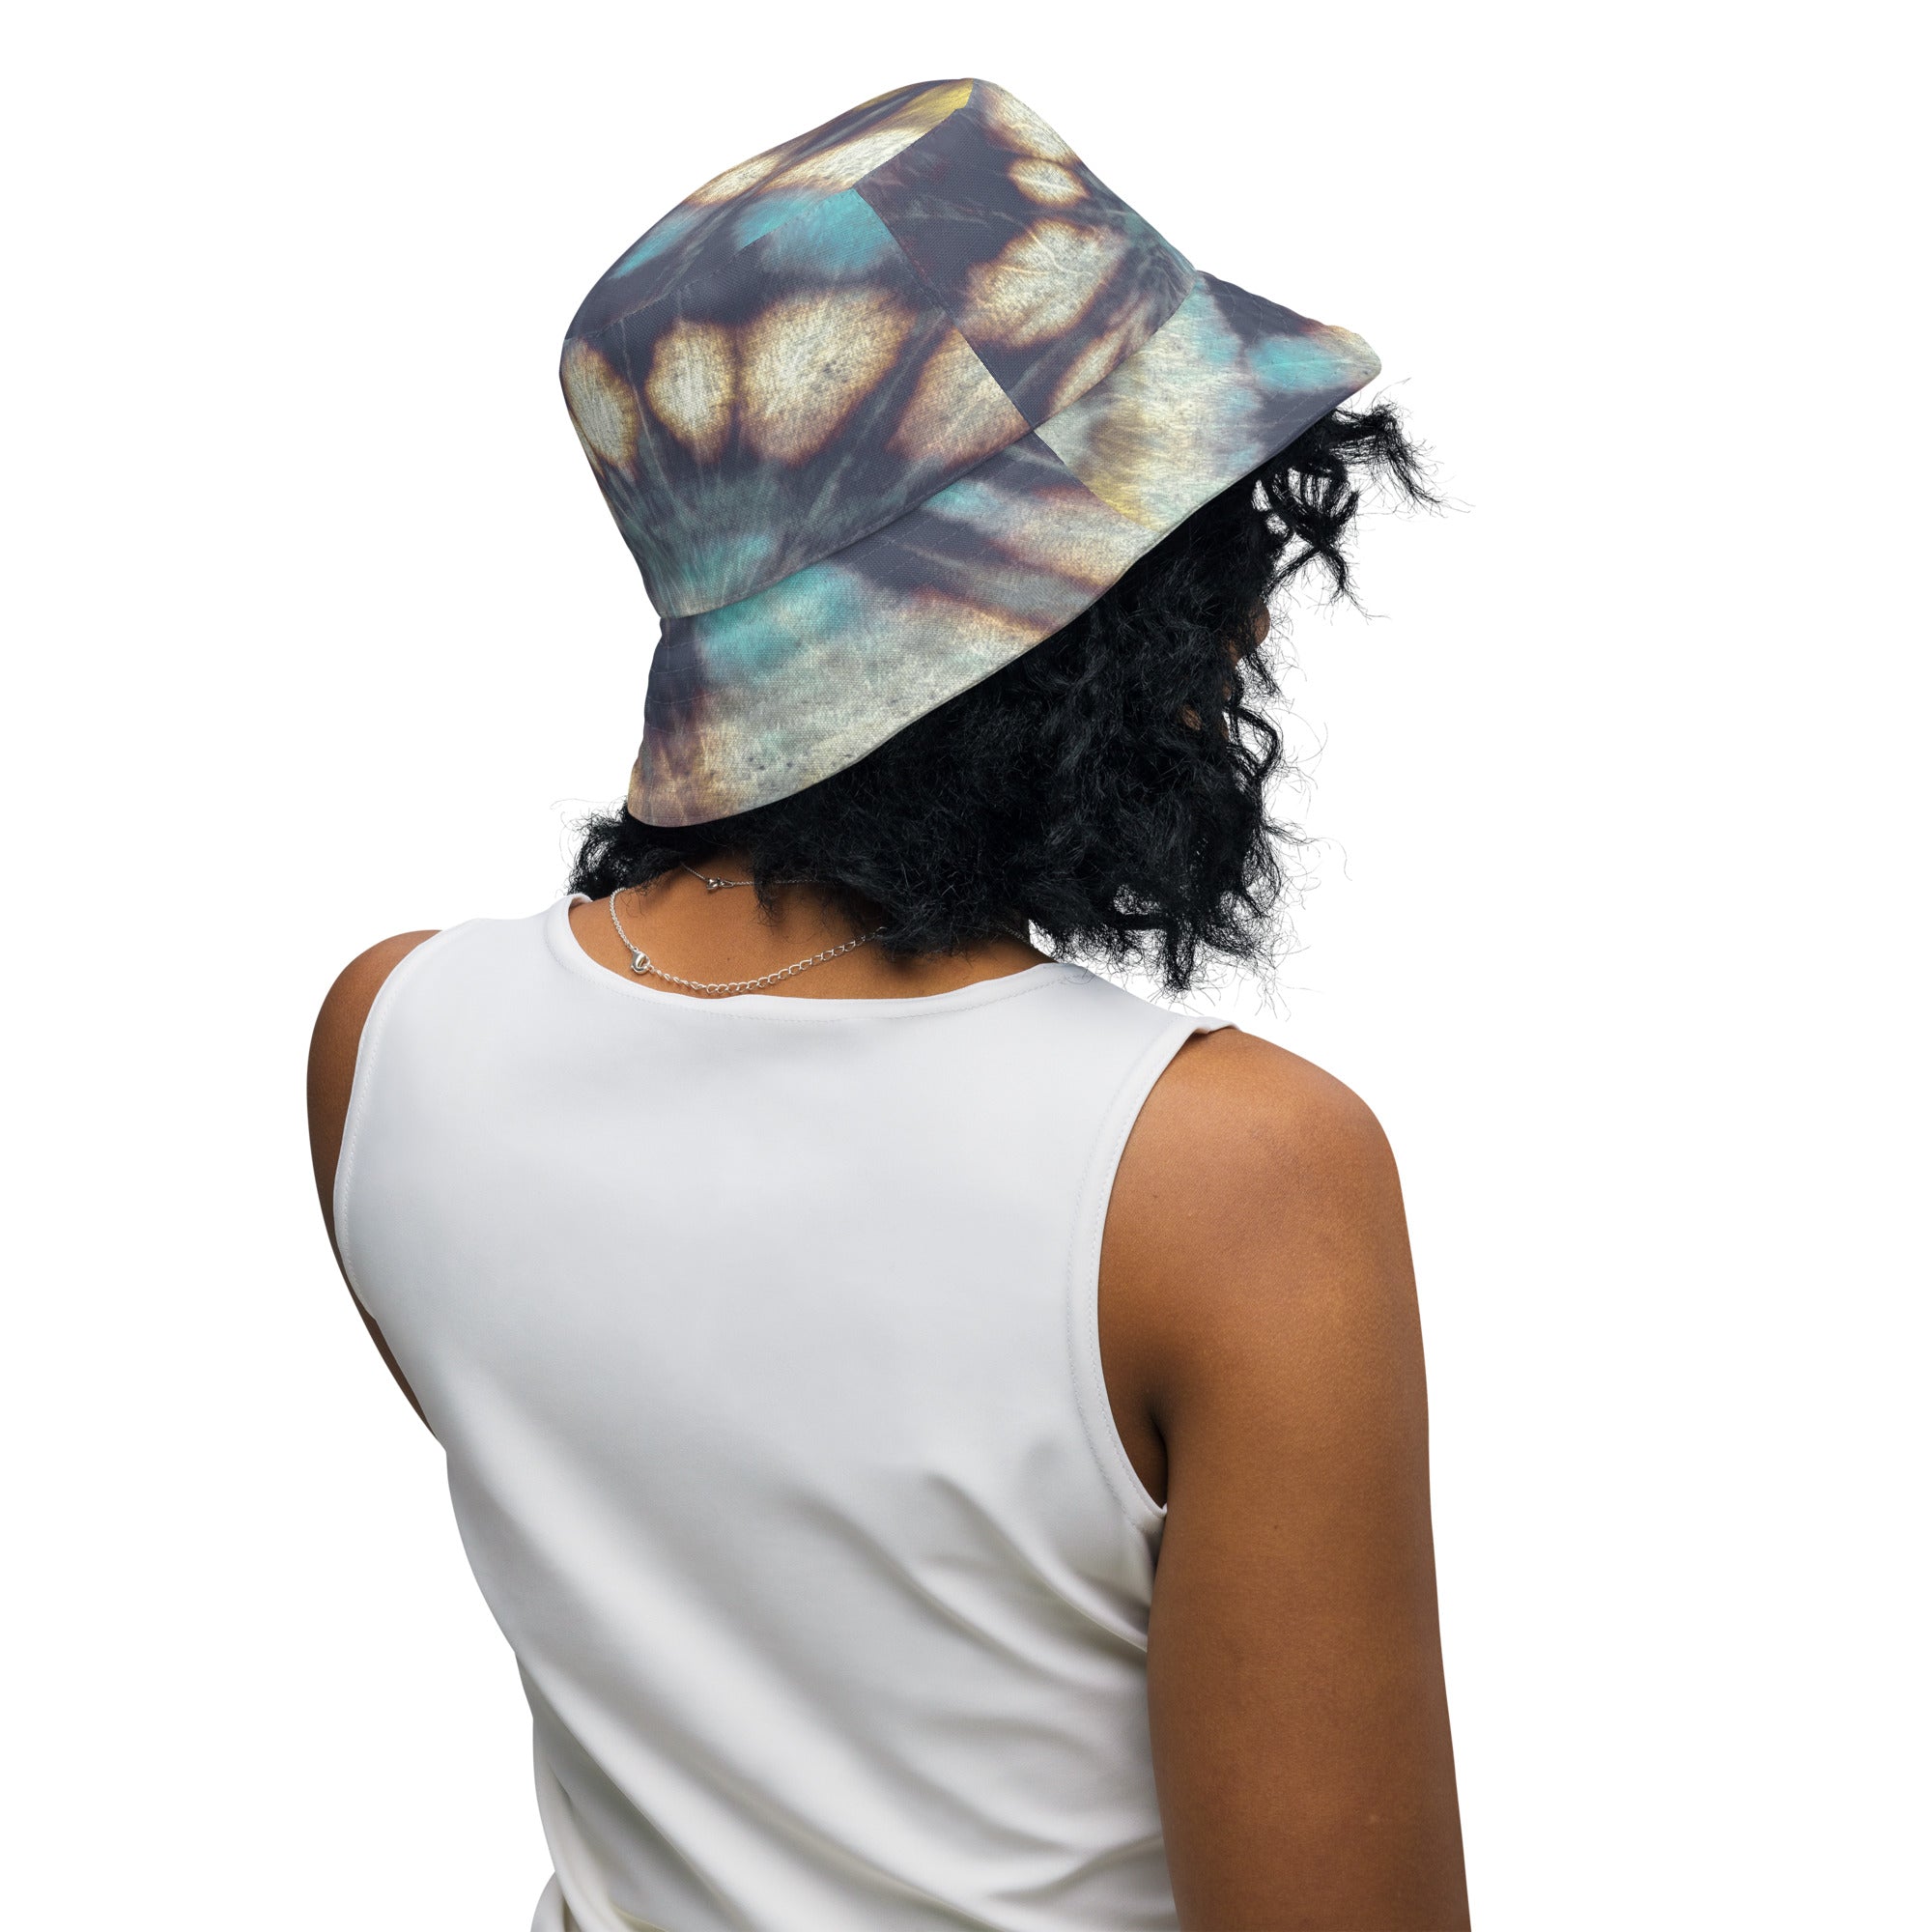 "Groovy Vibes: The Tie Dye Bucket Hat for a Splash of Colorful Retro Style!", lioness-love